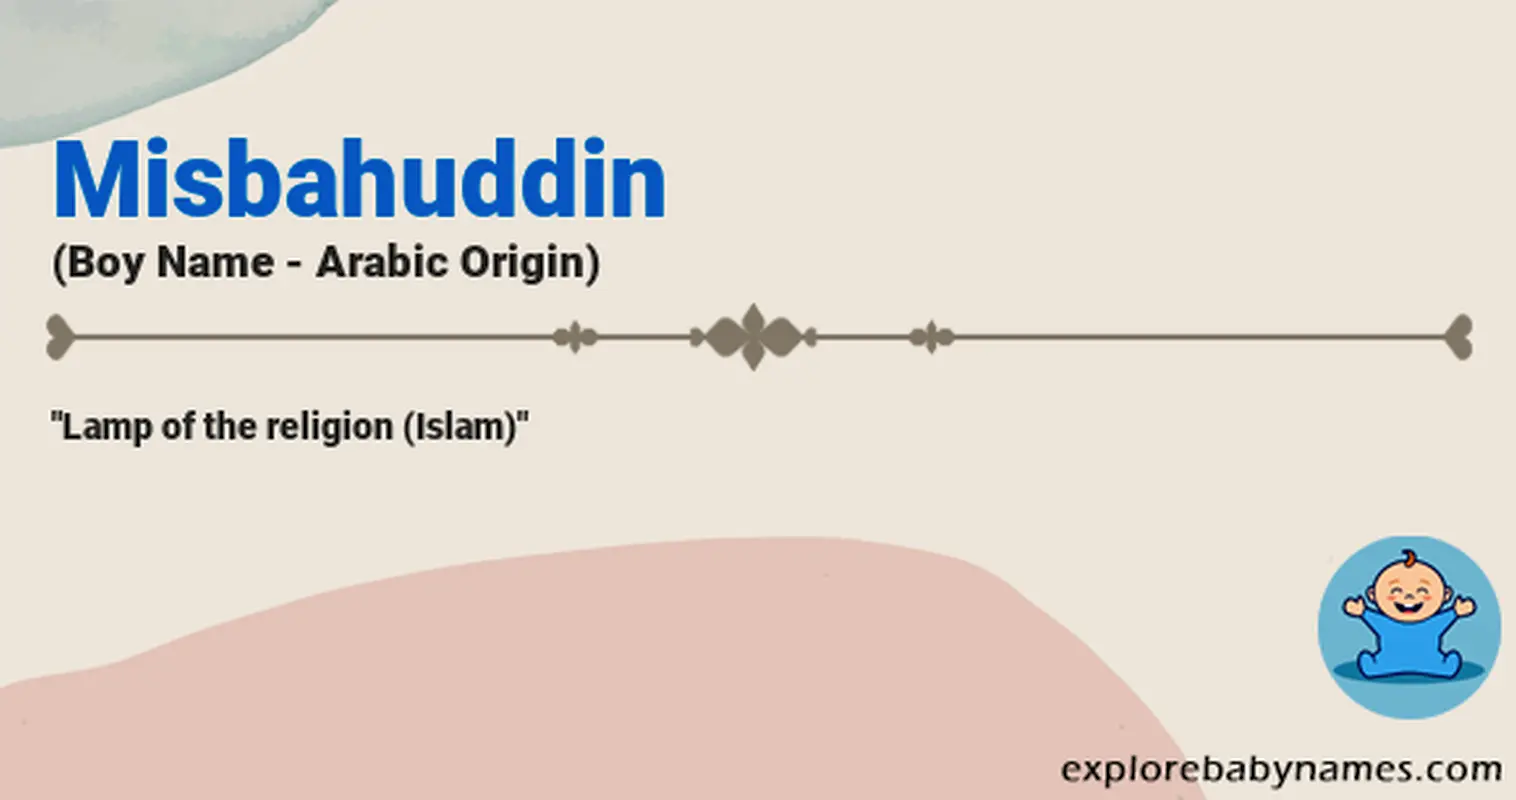 Meaning of Misbahuddin